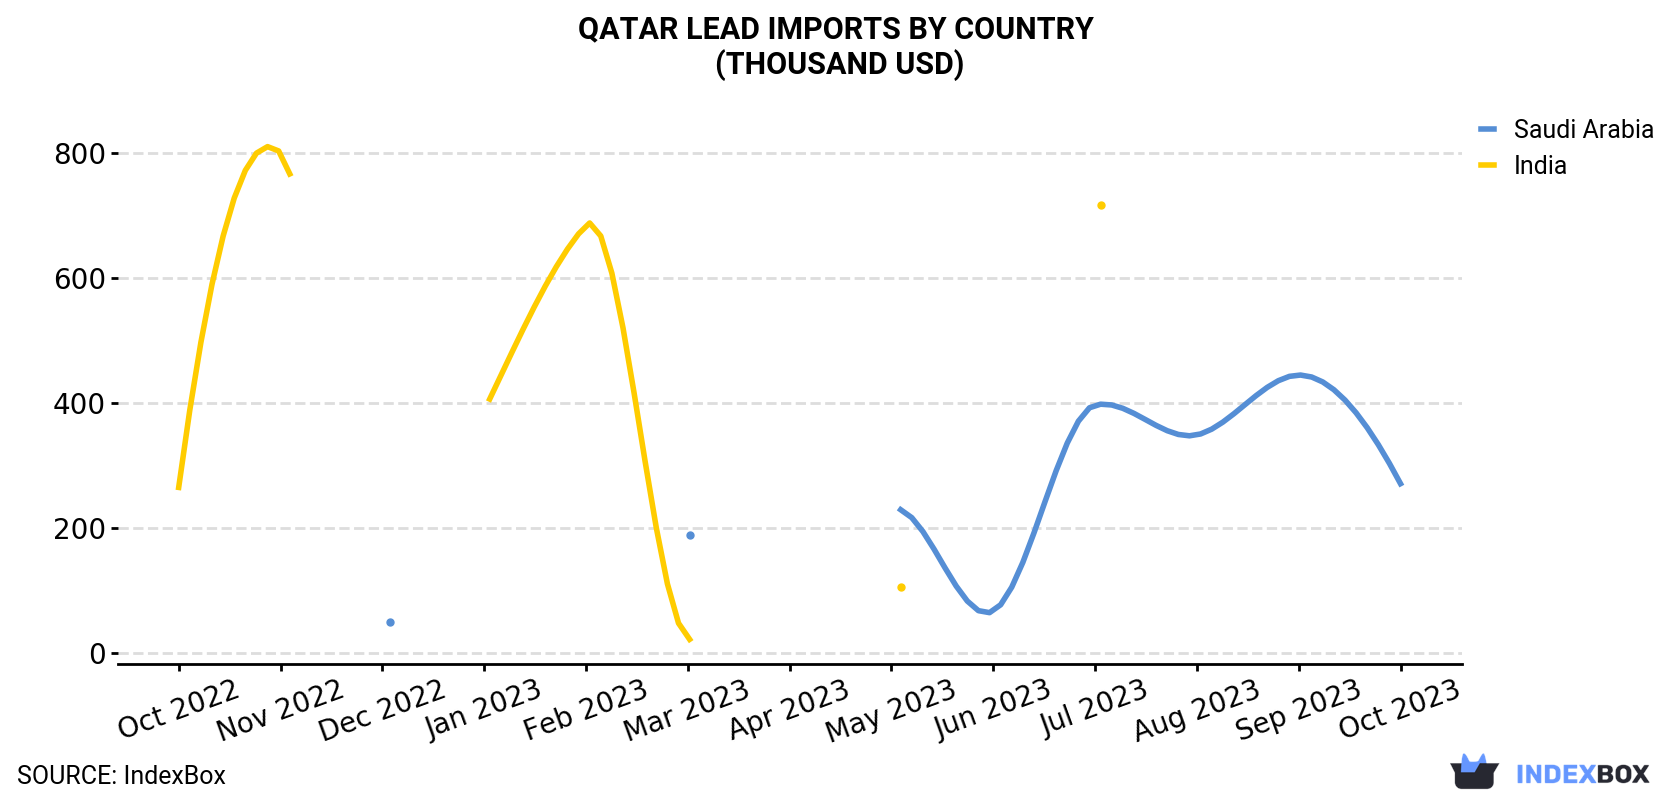 Qatar Lead Imports By Country (Thousand USD)